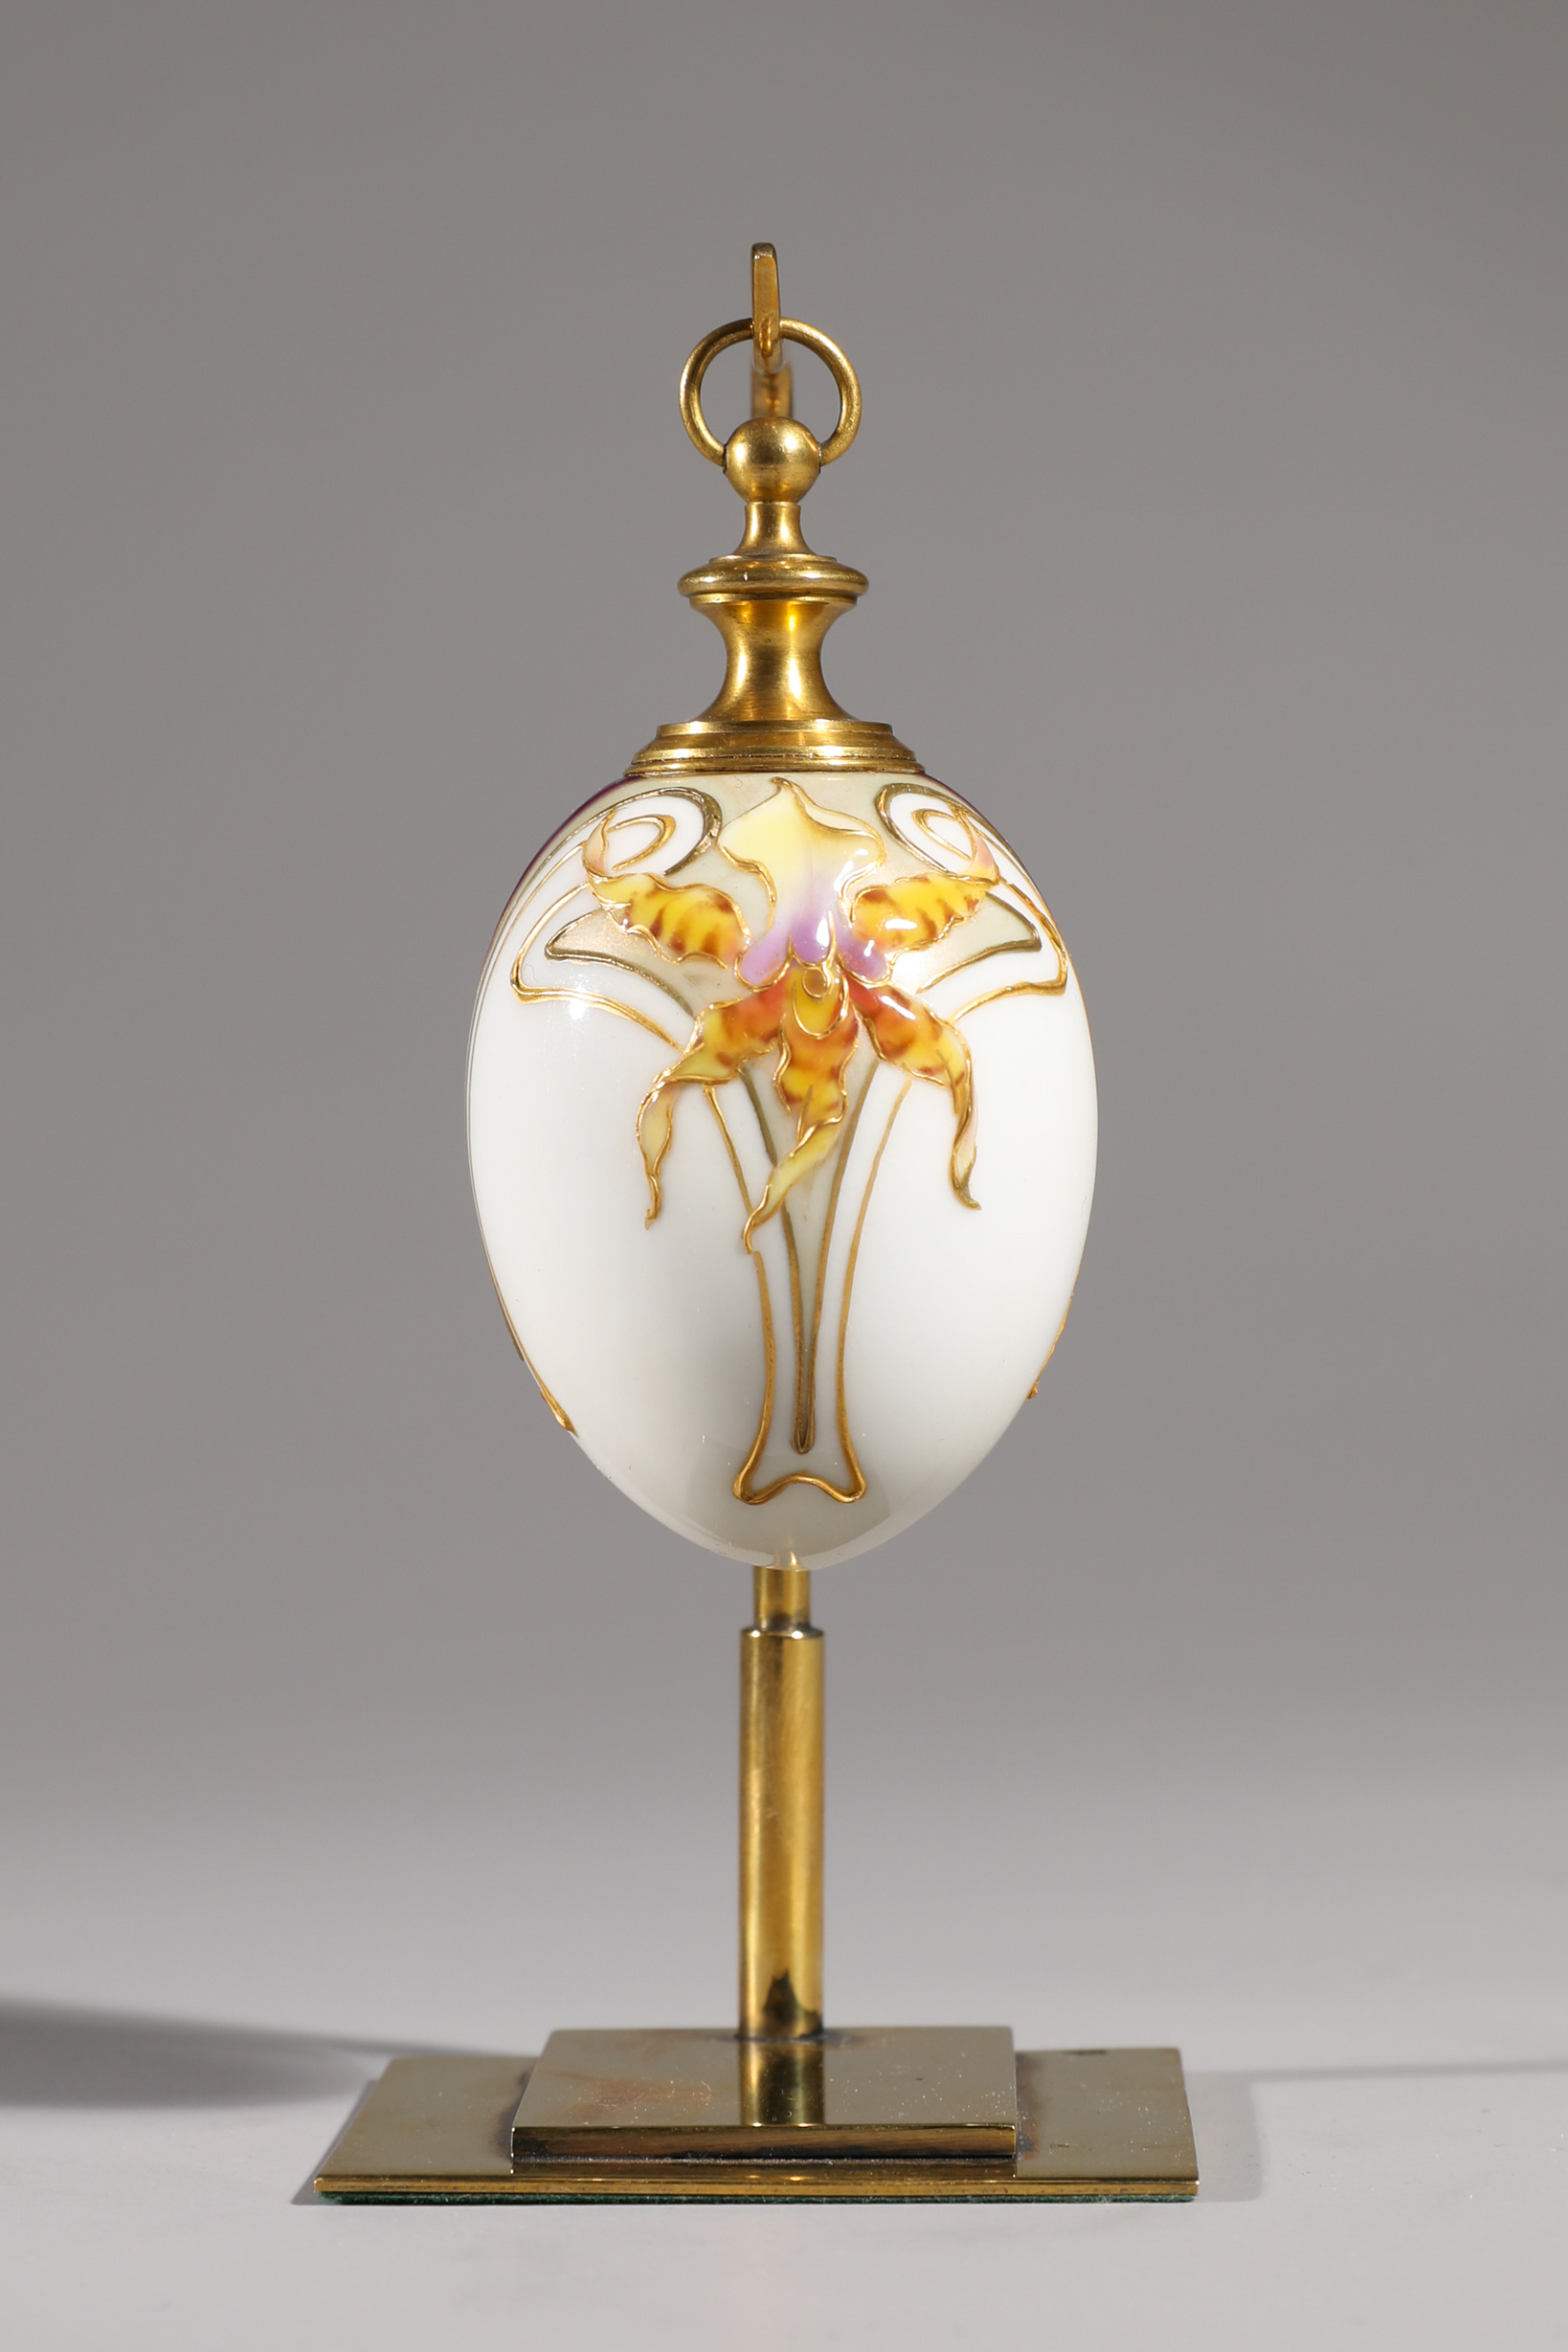 Max Schröder, Easter egg with orchids for the KPM Berlin - Image 2 of 5